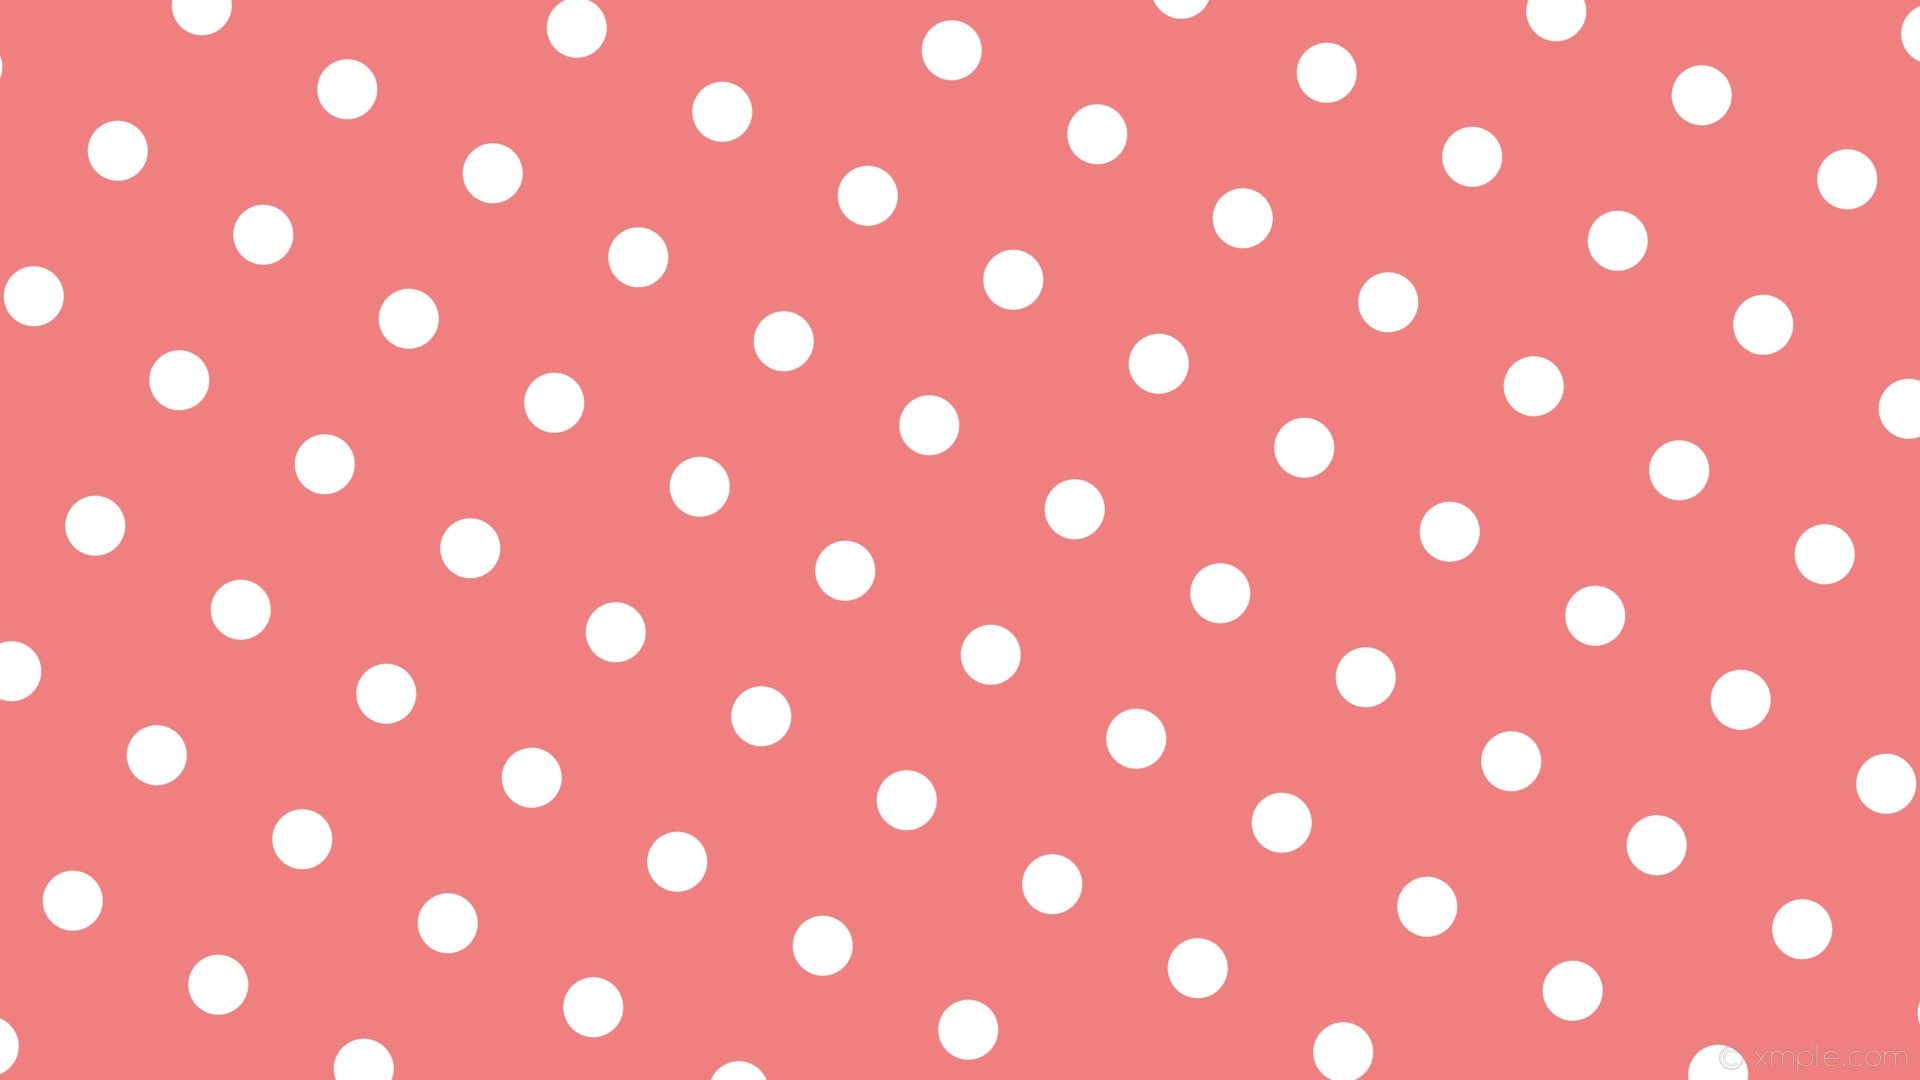 Polka Dot Free Wallpaper and Background